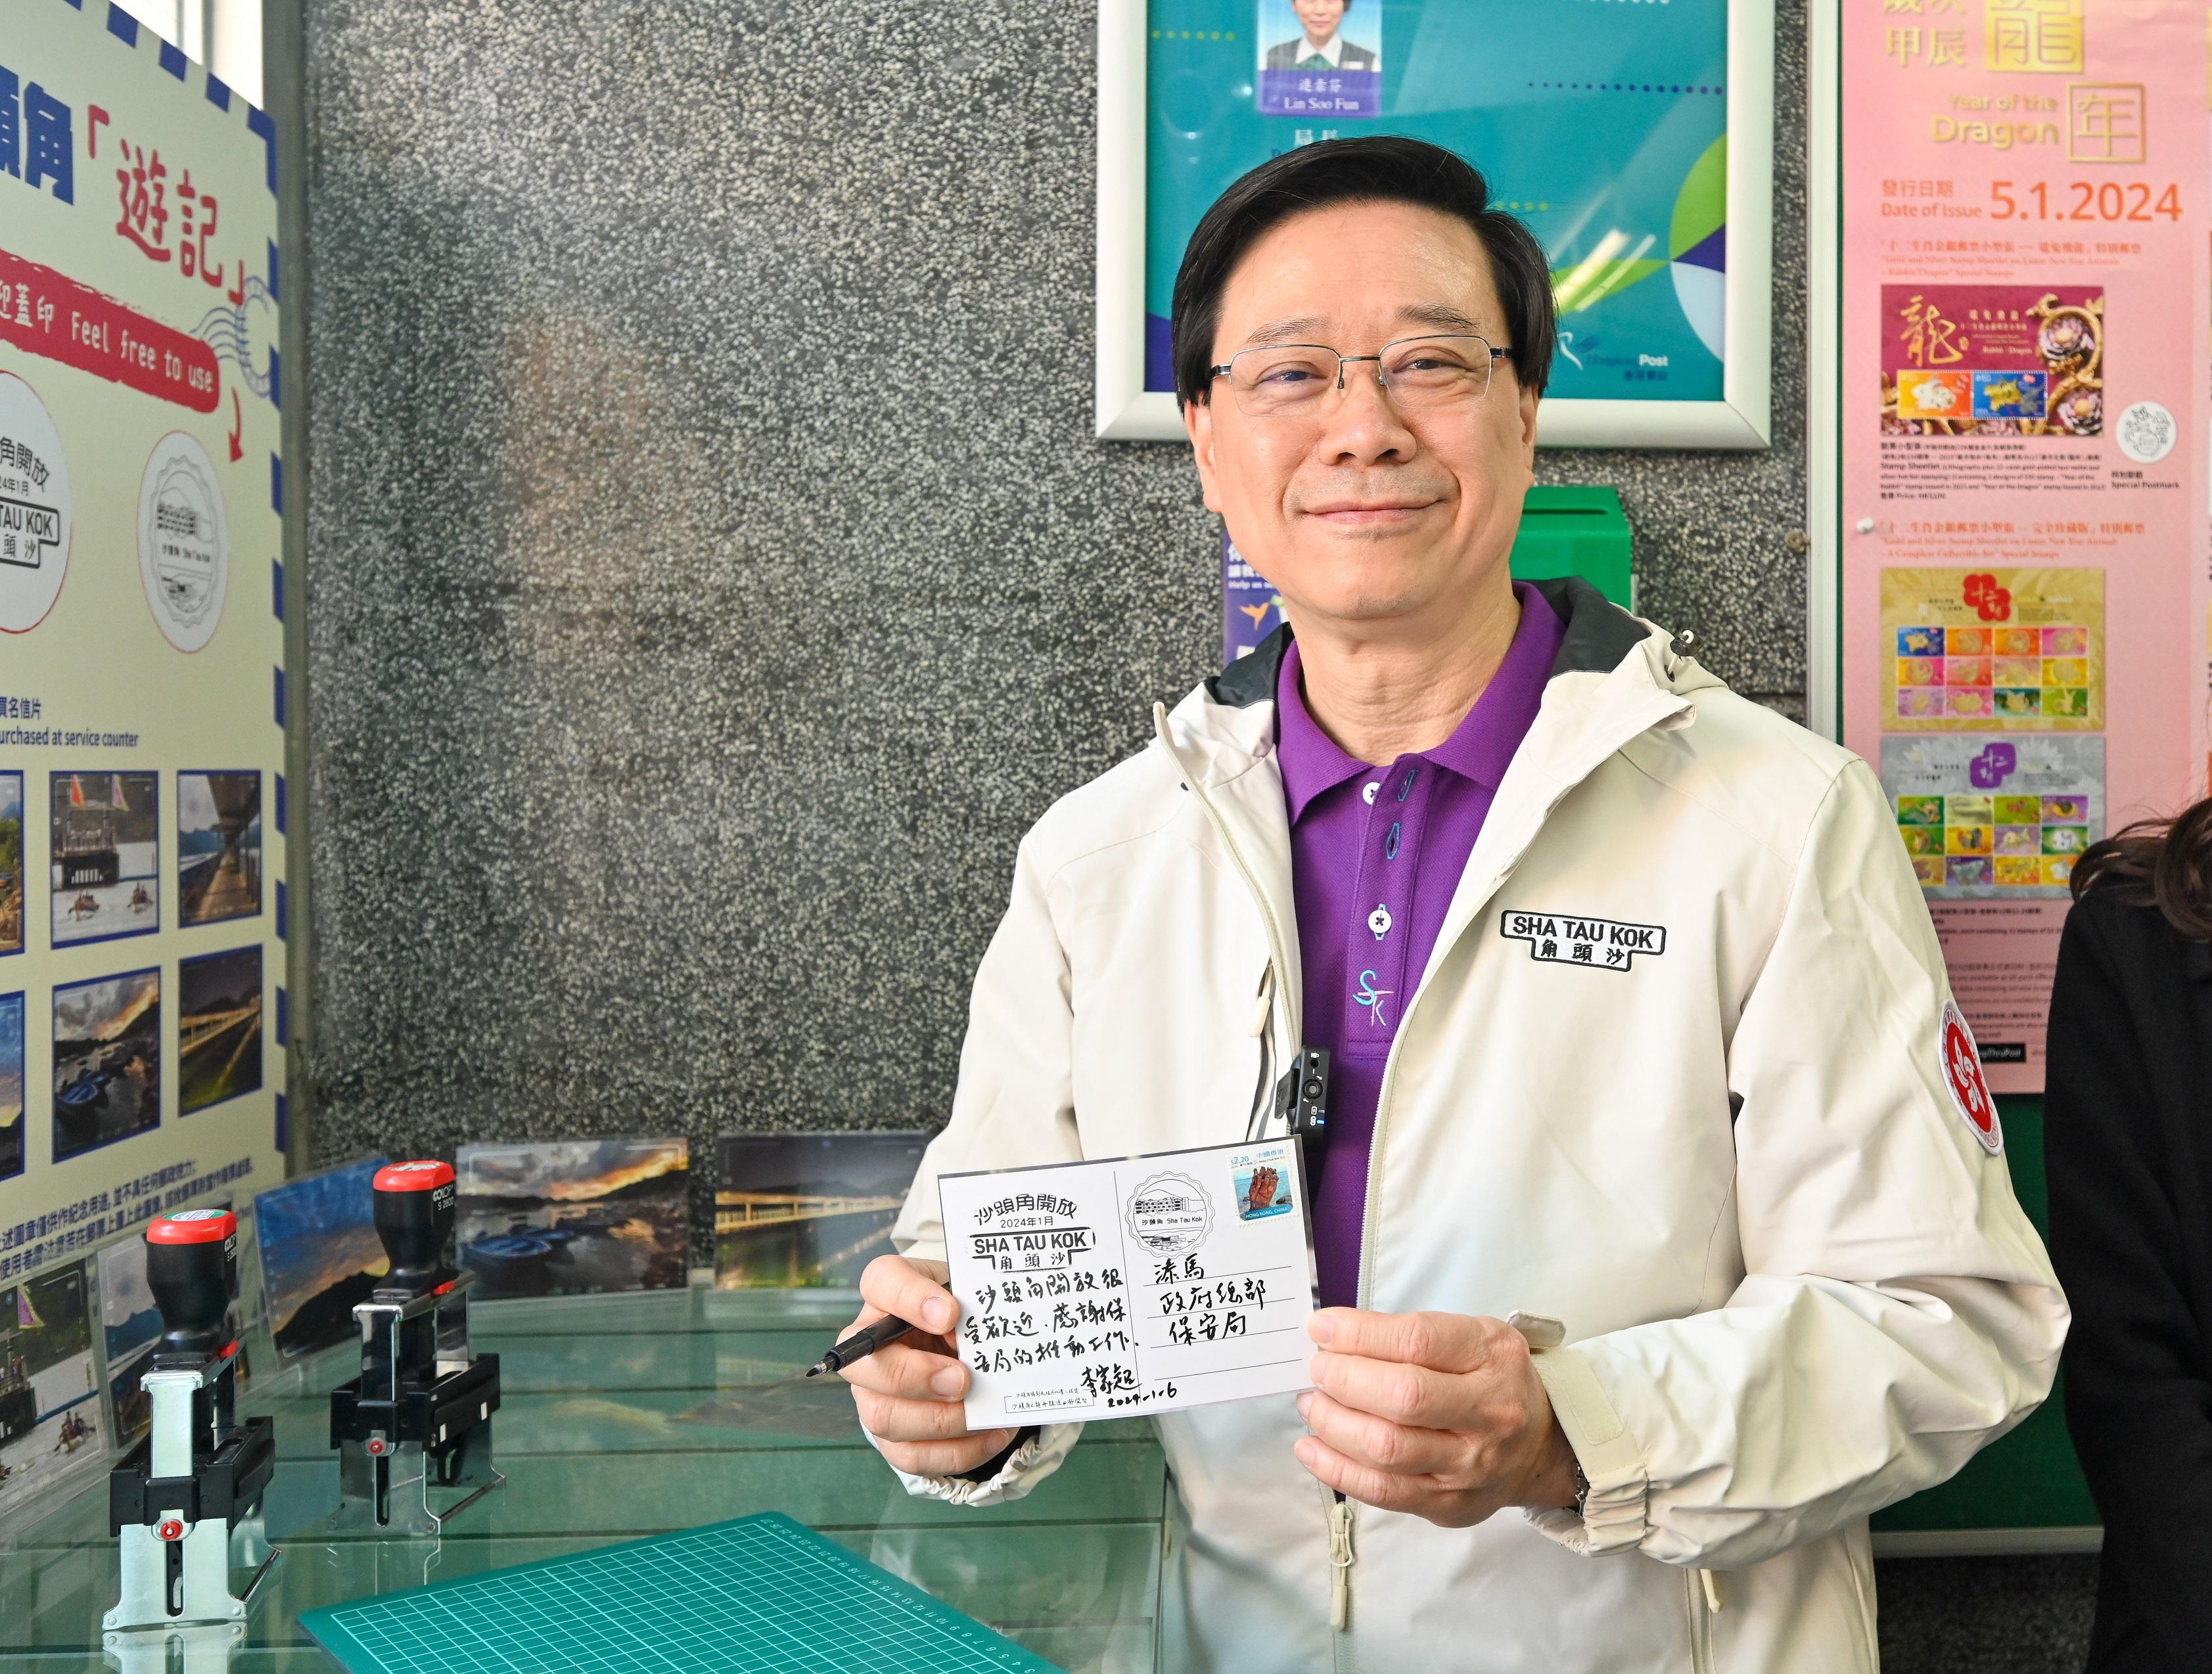 The Chief Executive, Mr John Lee, officiated at the Second Phase Opening-up of Sha Tau Kok Launching Ceremony today (January 6). Photo shows Mr Lee holding the postcard he wrote for colleagues in the Security Bureau at the Sha Tau Kok Post Office.